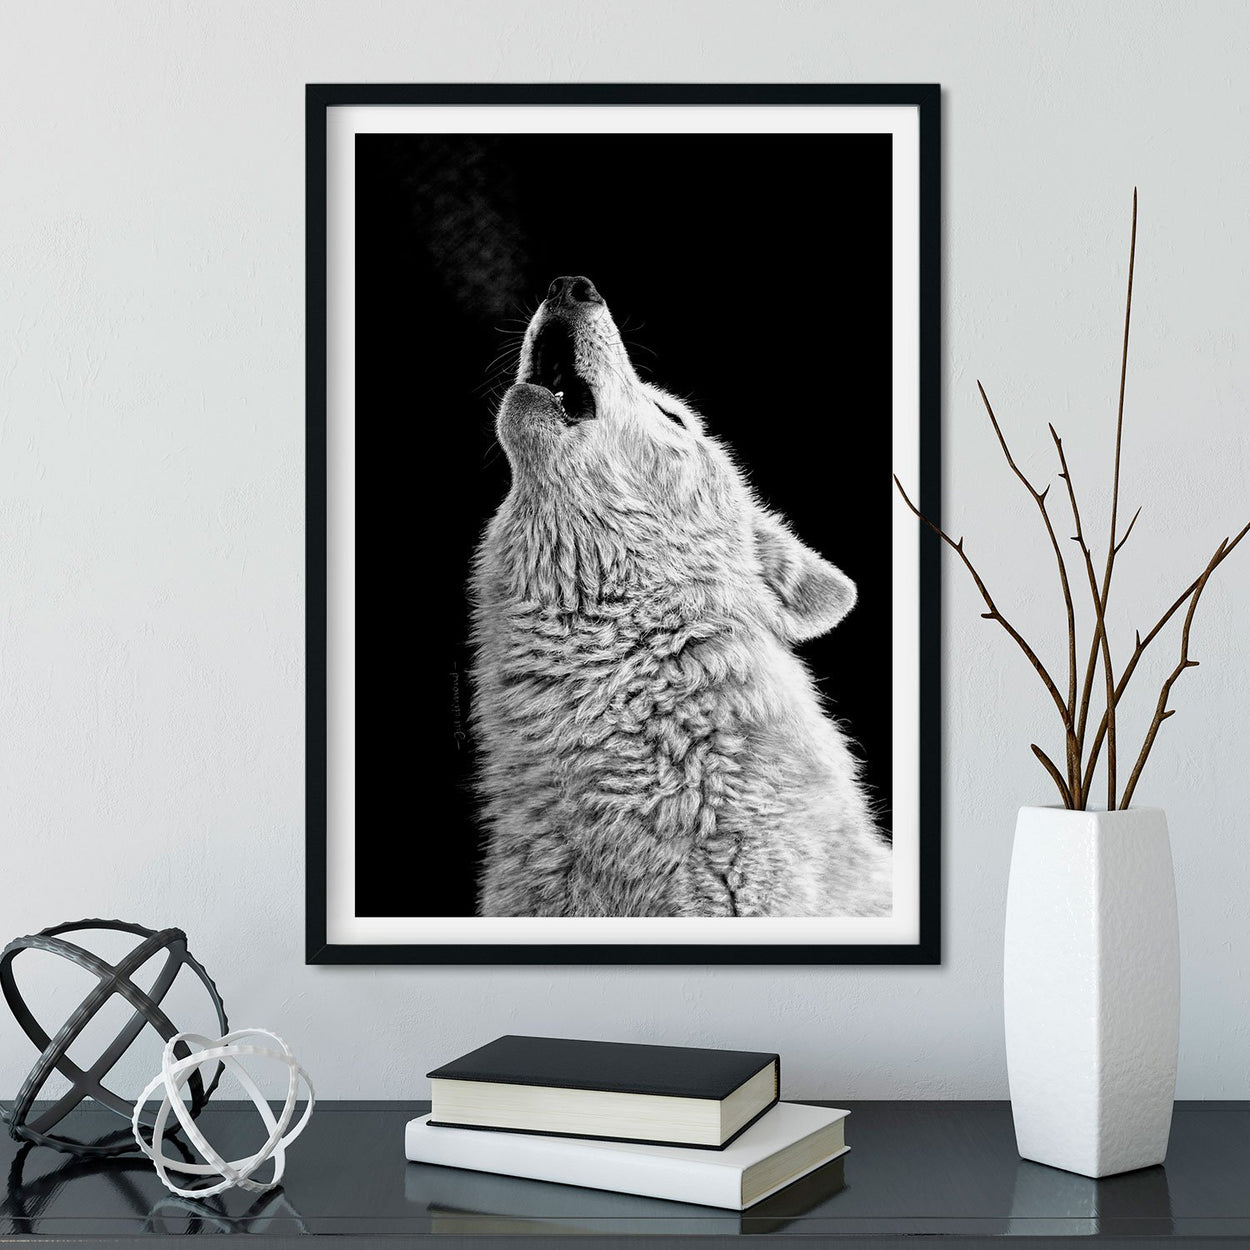 Howling Wolf Wall Art Framed - The Thriving Wild